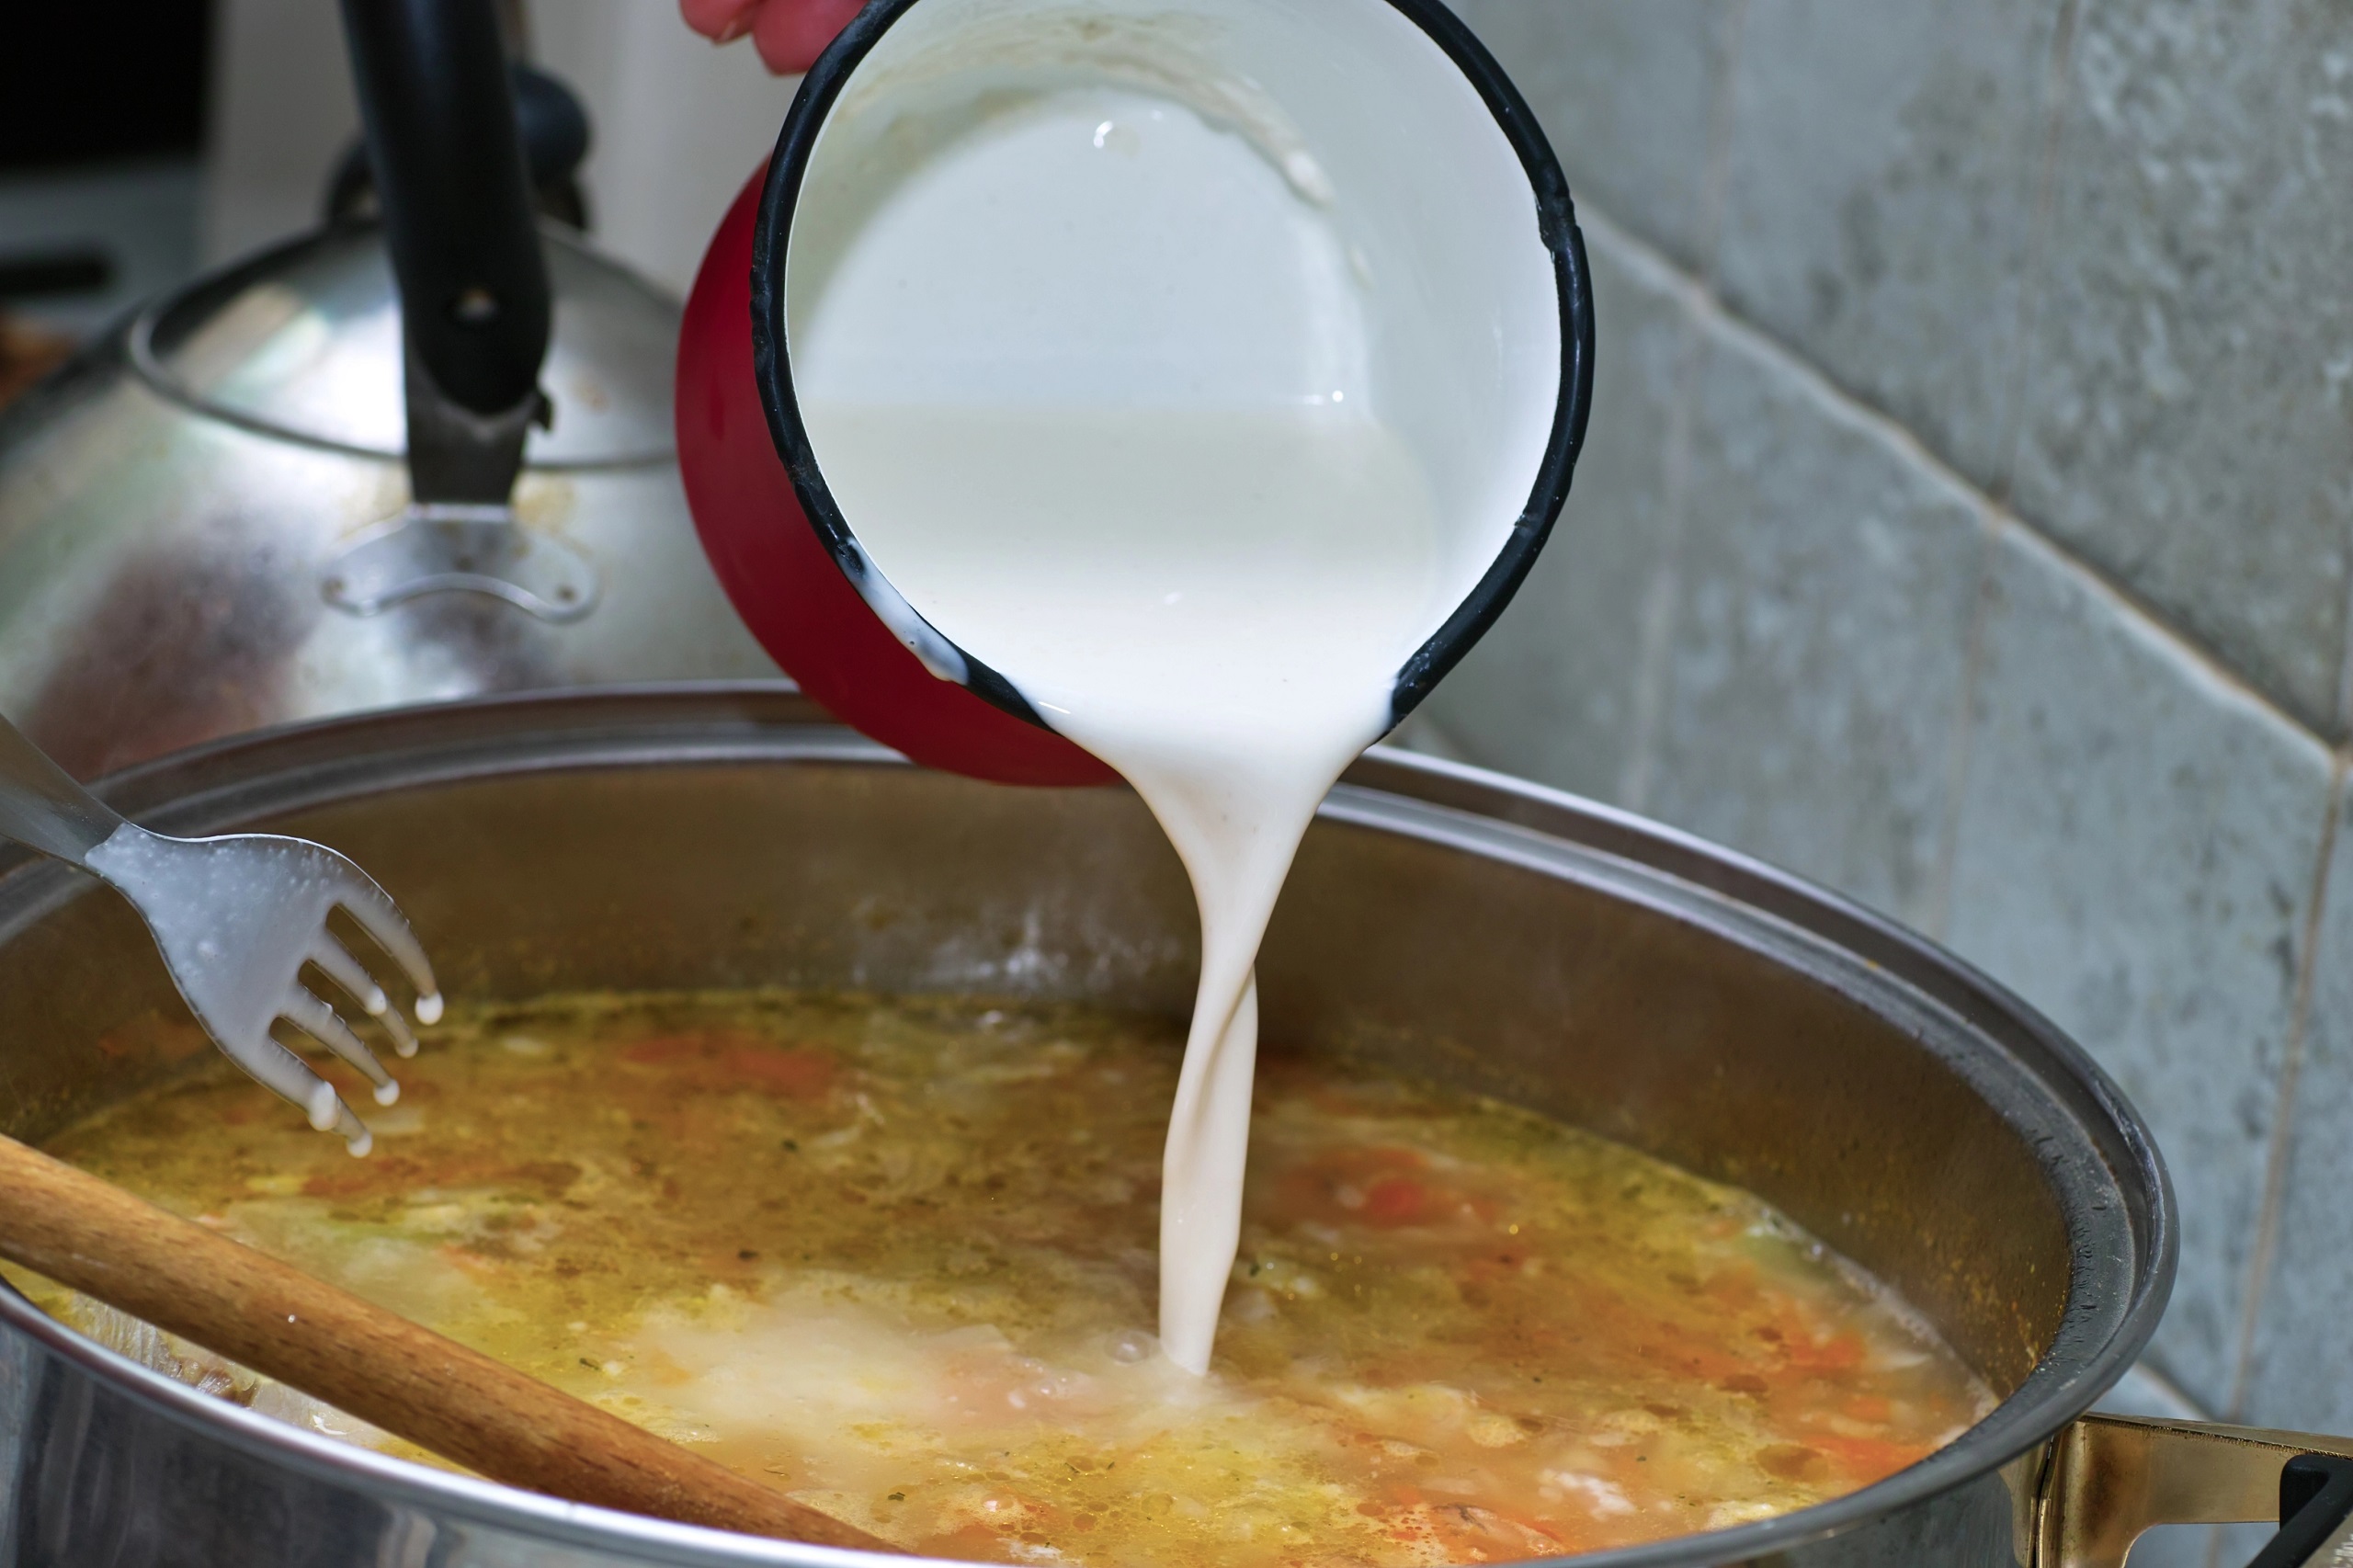 Milk or cream being poured from a red saucepan into a simmering steel pot of pickled cucumber soup to thicken it at the perfect moment with a big wooden spoon for stirring.